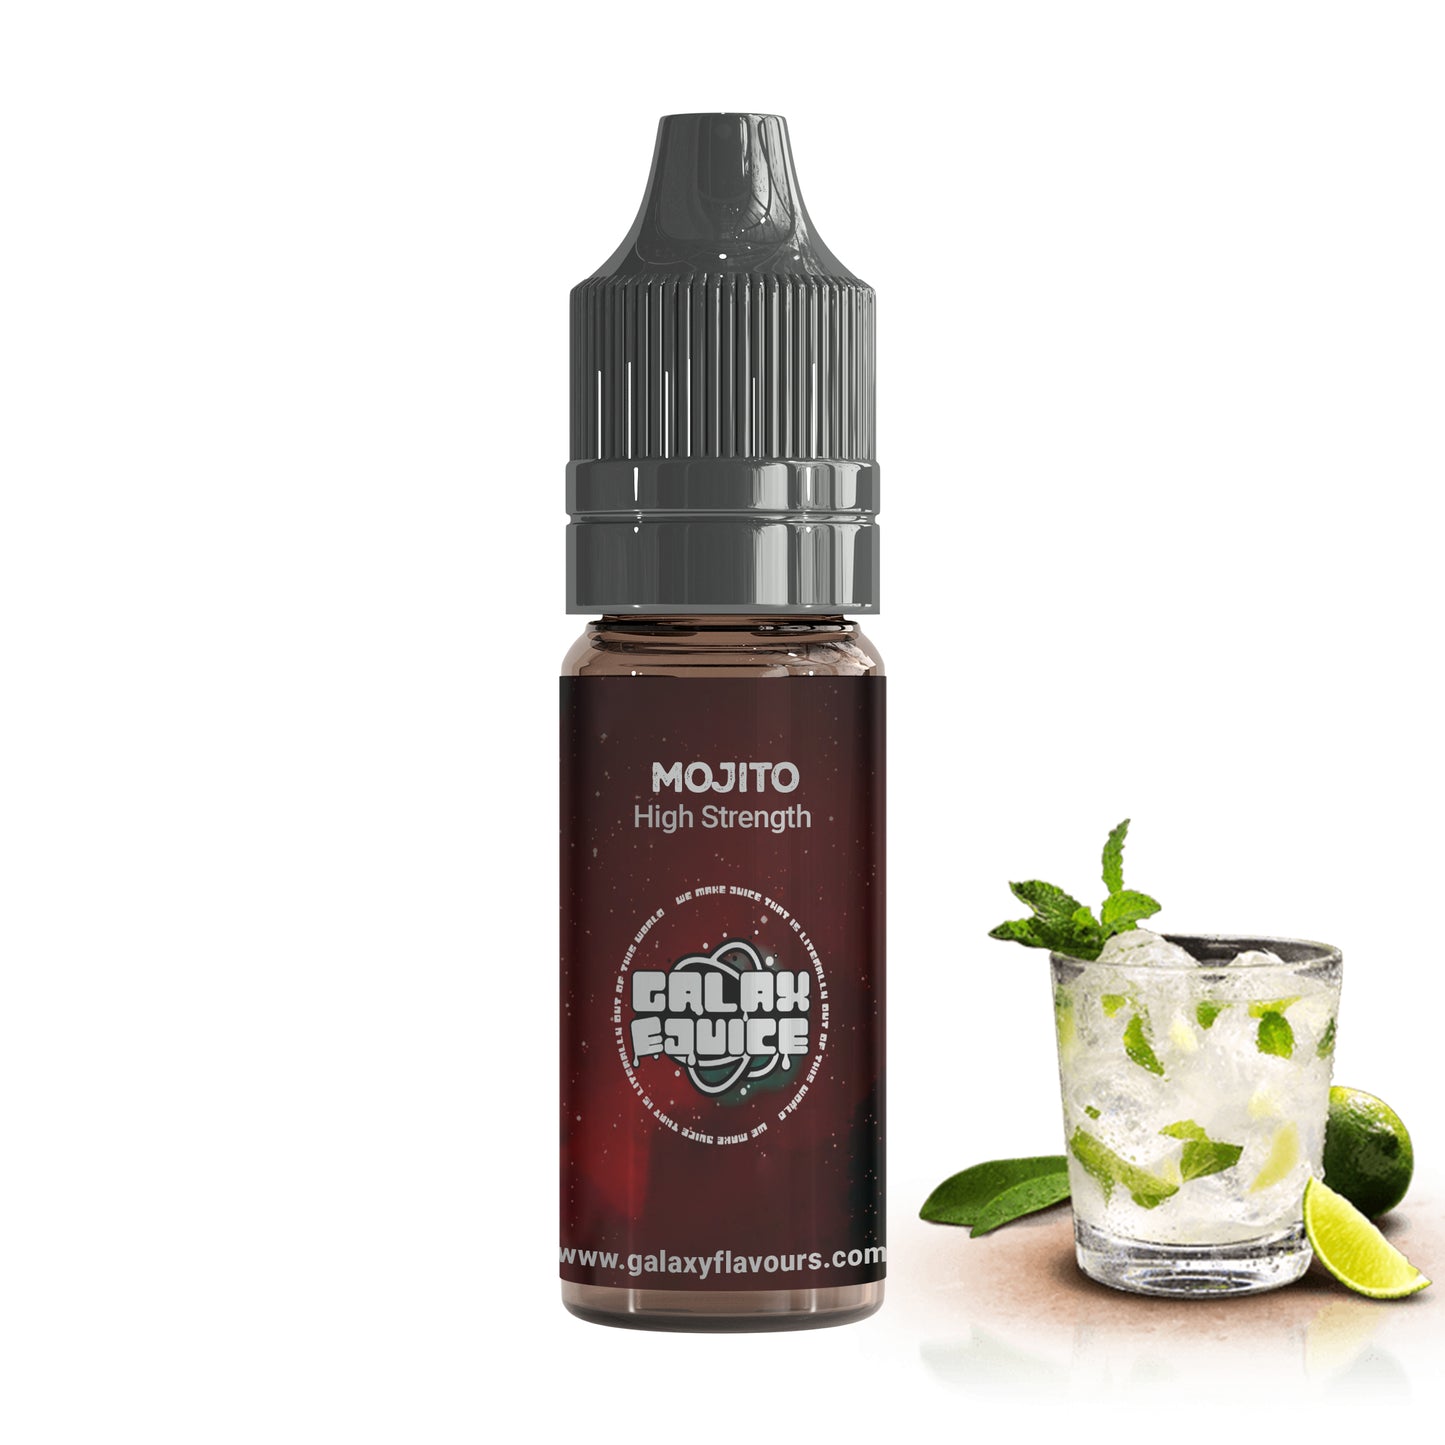 Mojito High Strength Professional Flavouring.